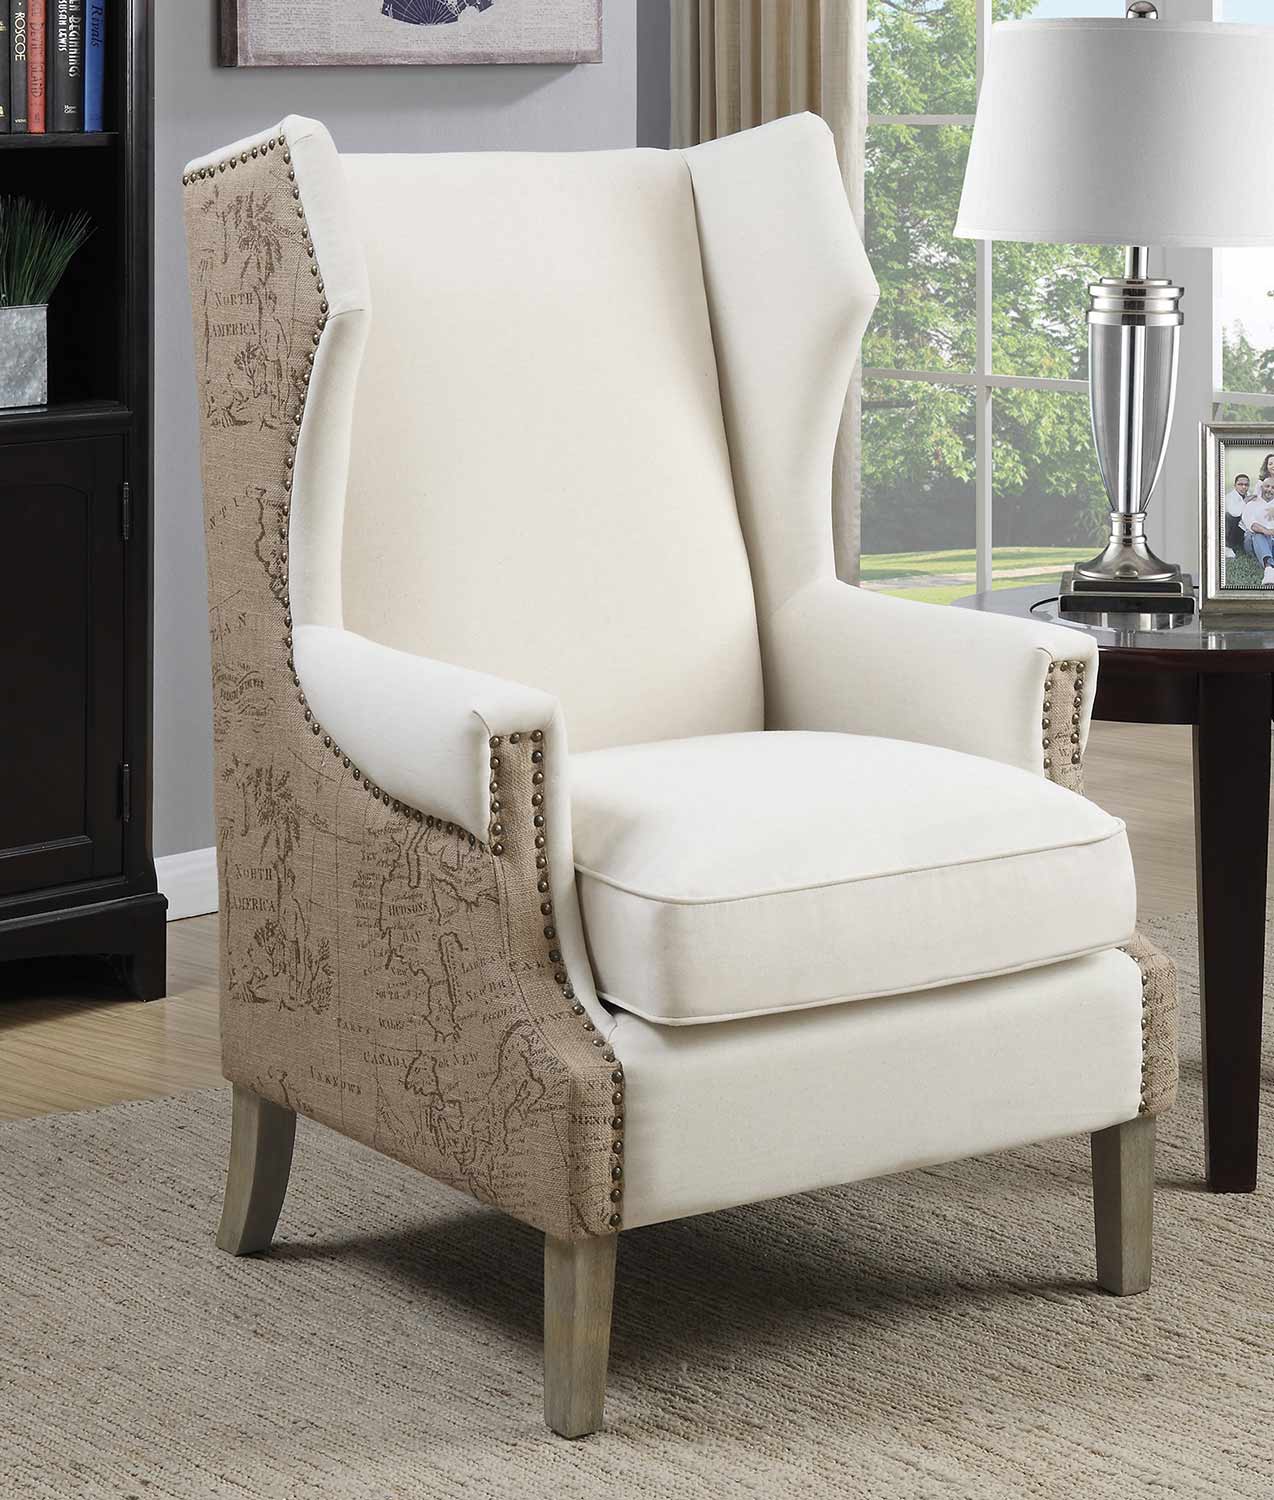 Coaster 902491 Accent Chair - Cream 902491 at Homelement.com